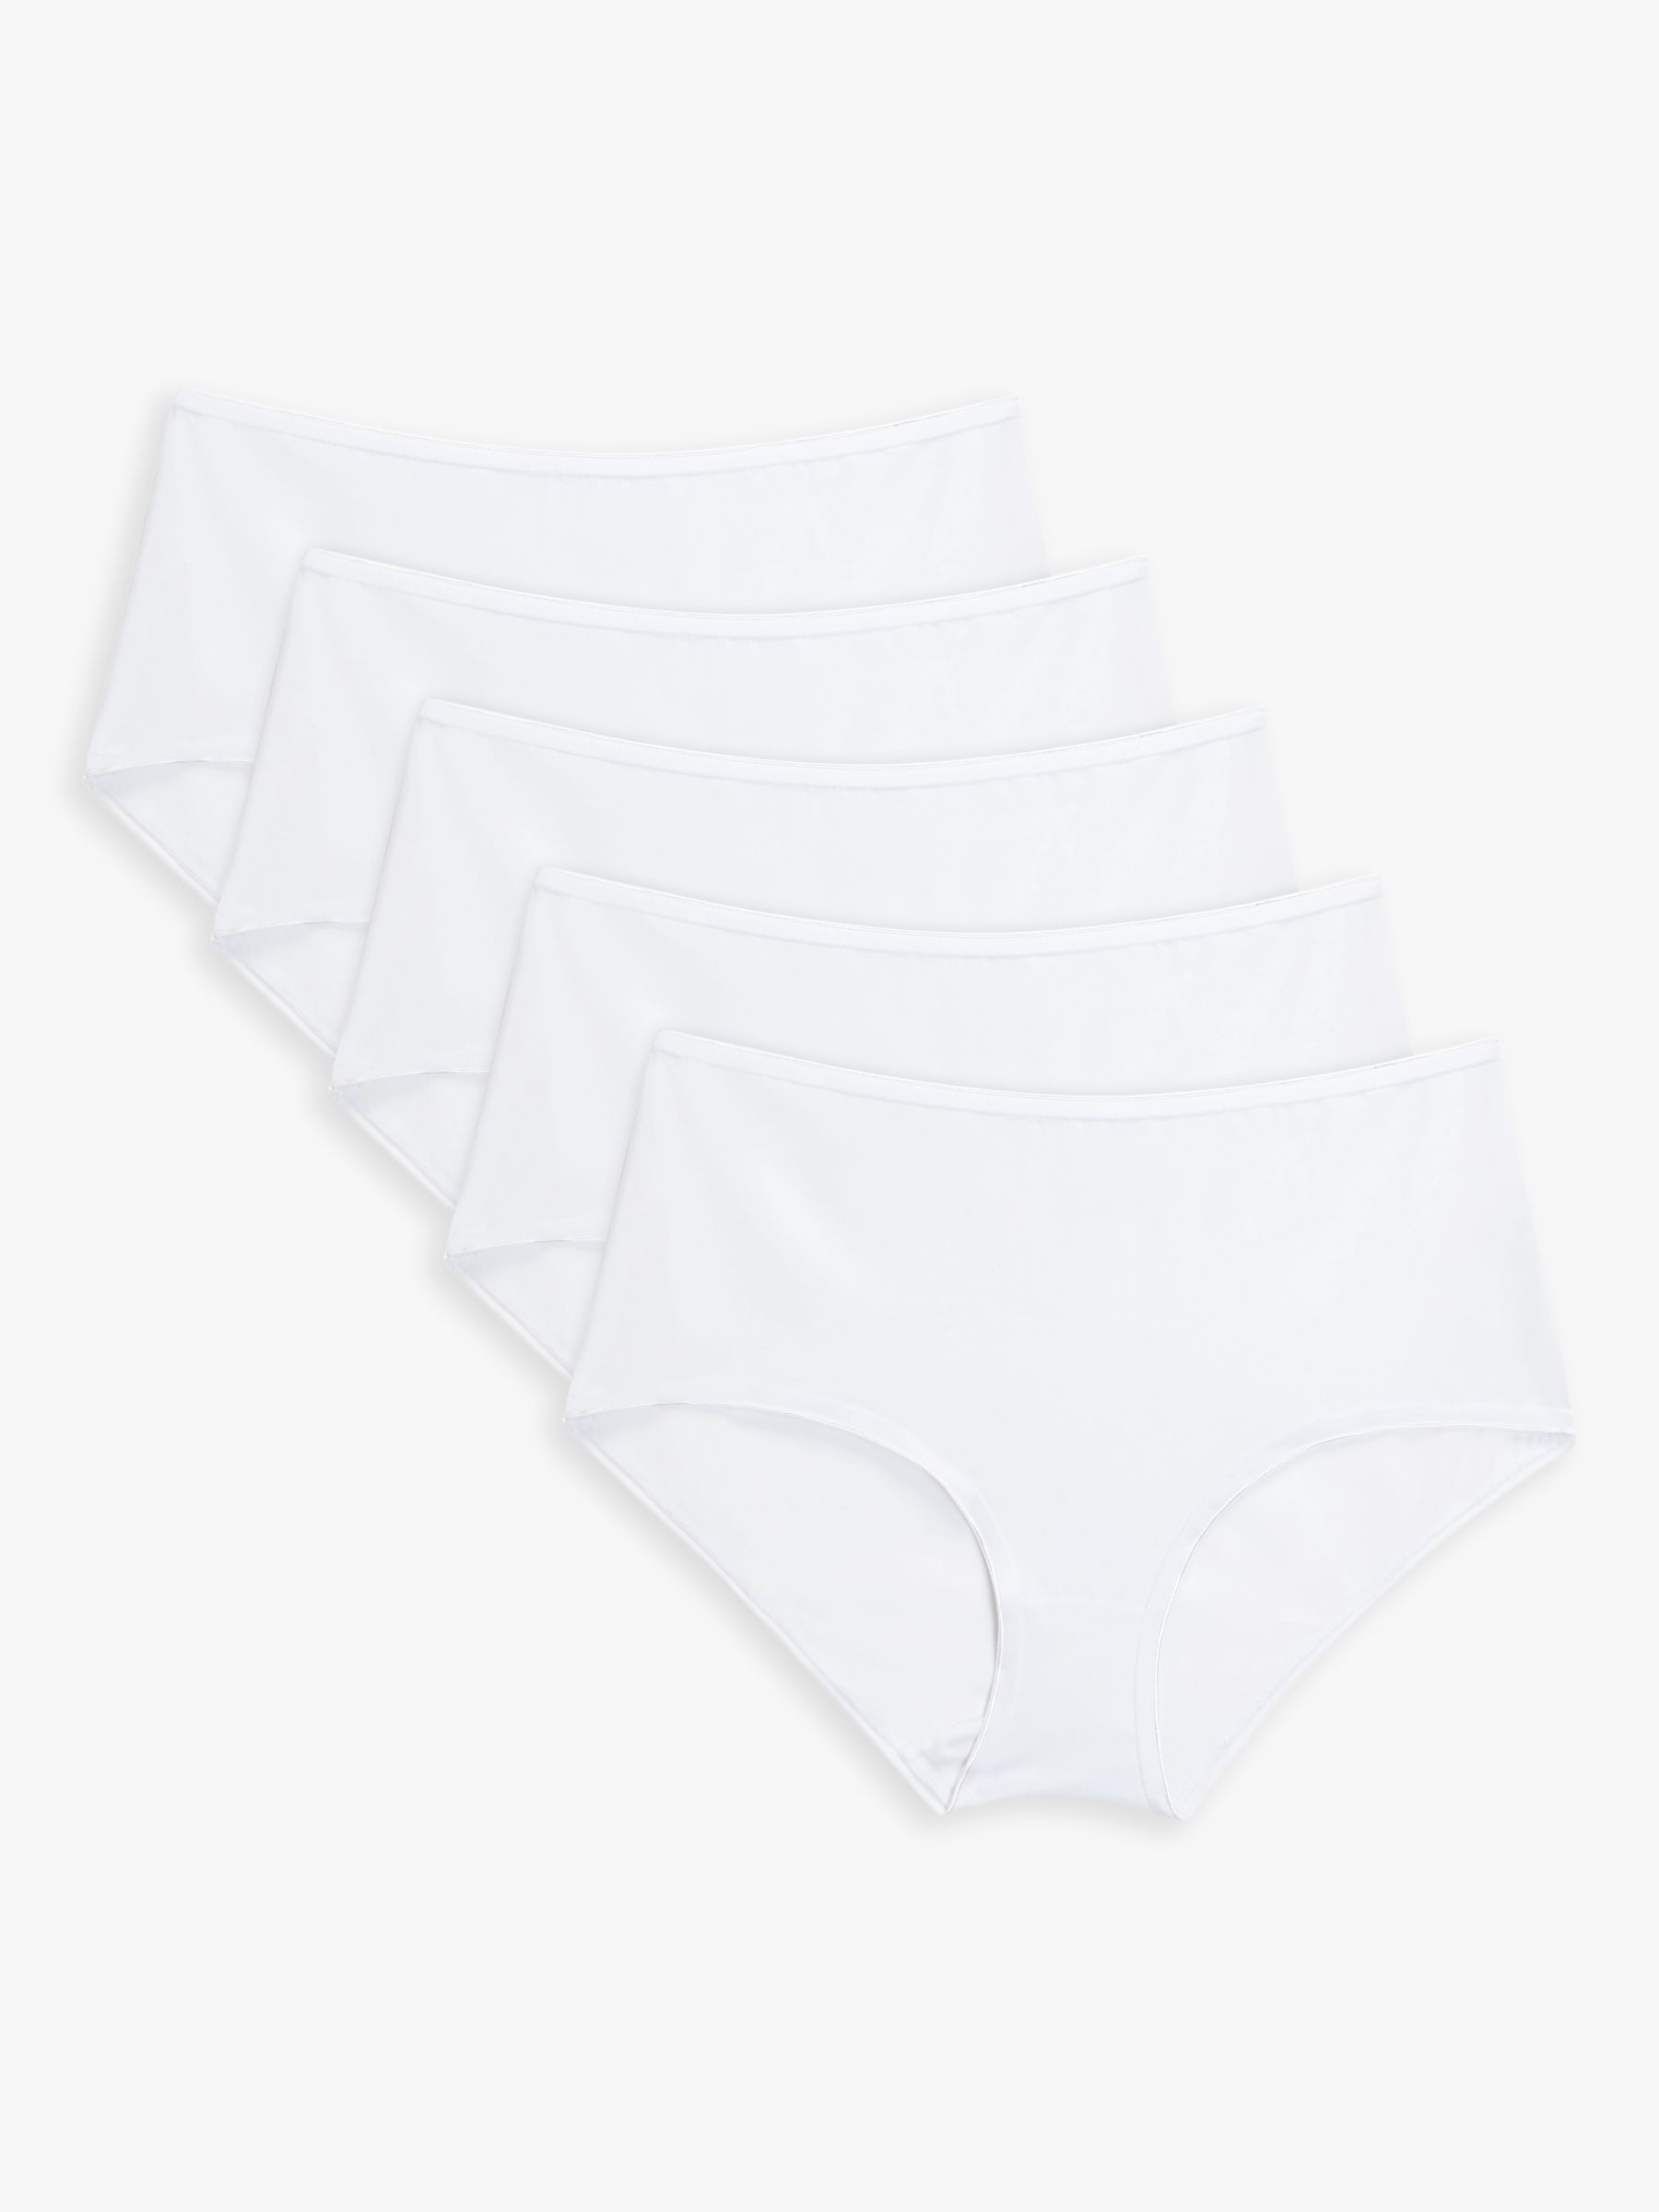 John Lewis ANYDAY Cotton Full Briefs, Pack of 5, White, 10